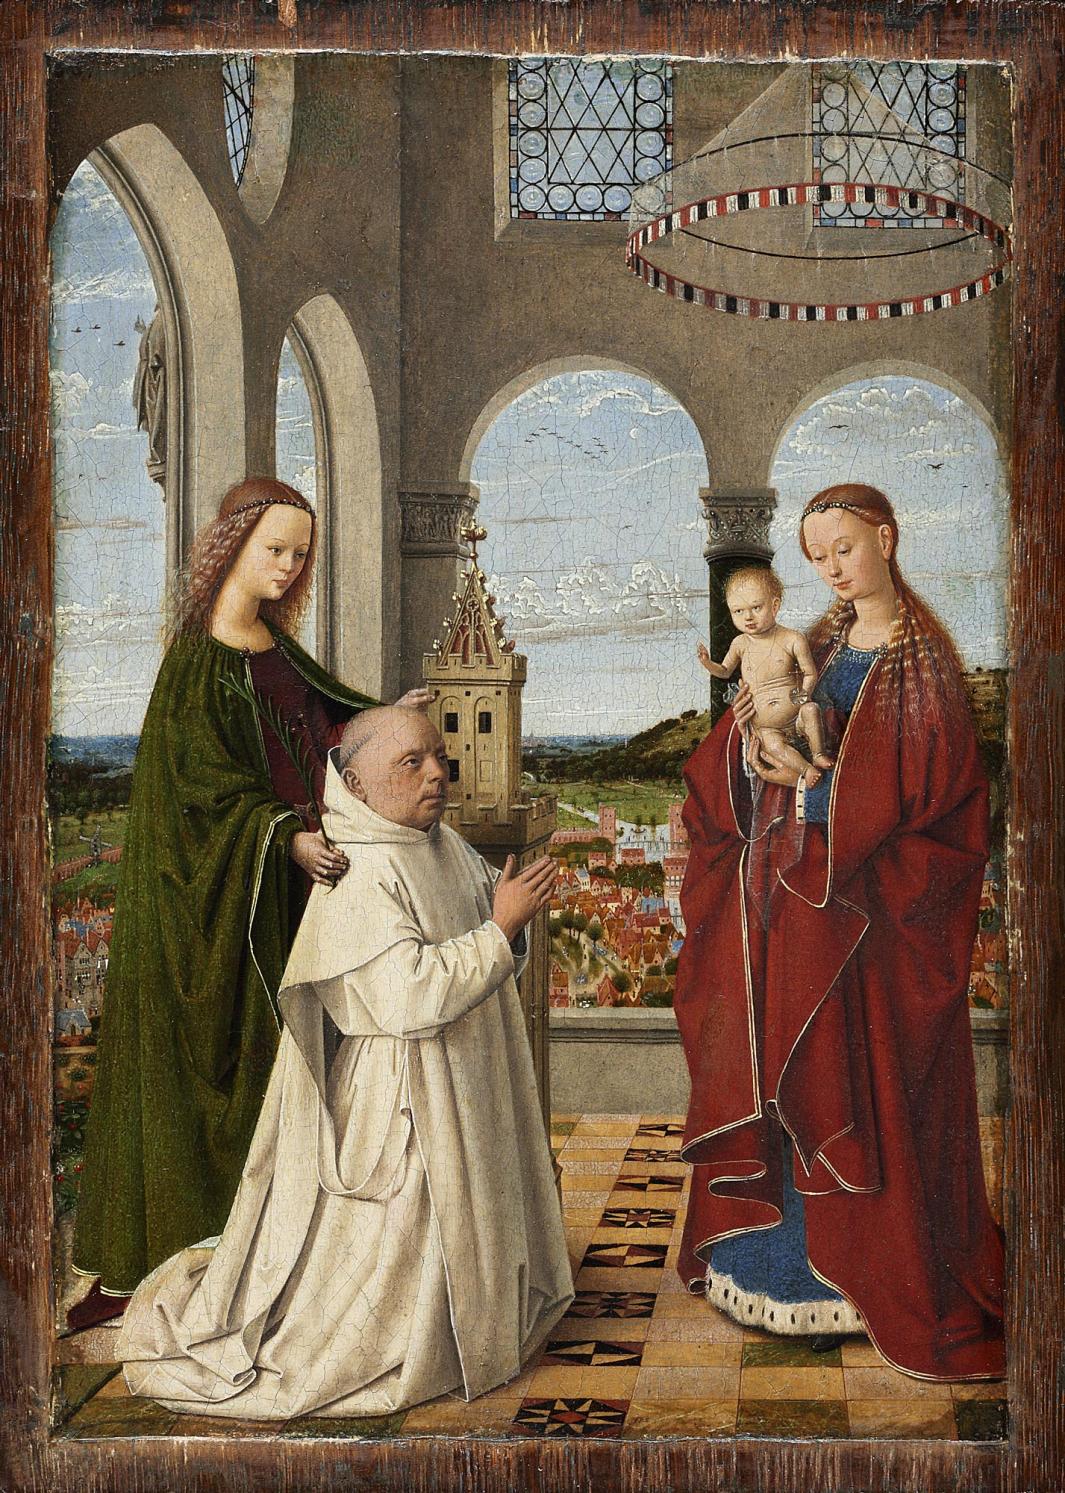 religious depiction of man kneeling in front of the Virgin and Child, with saint at his back, circa 1400s